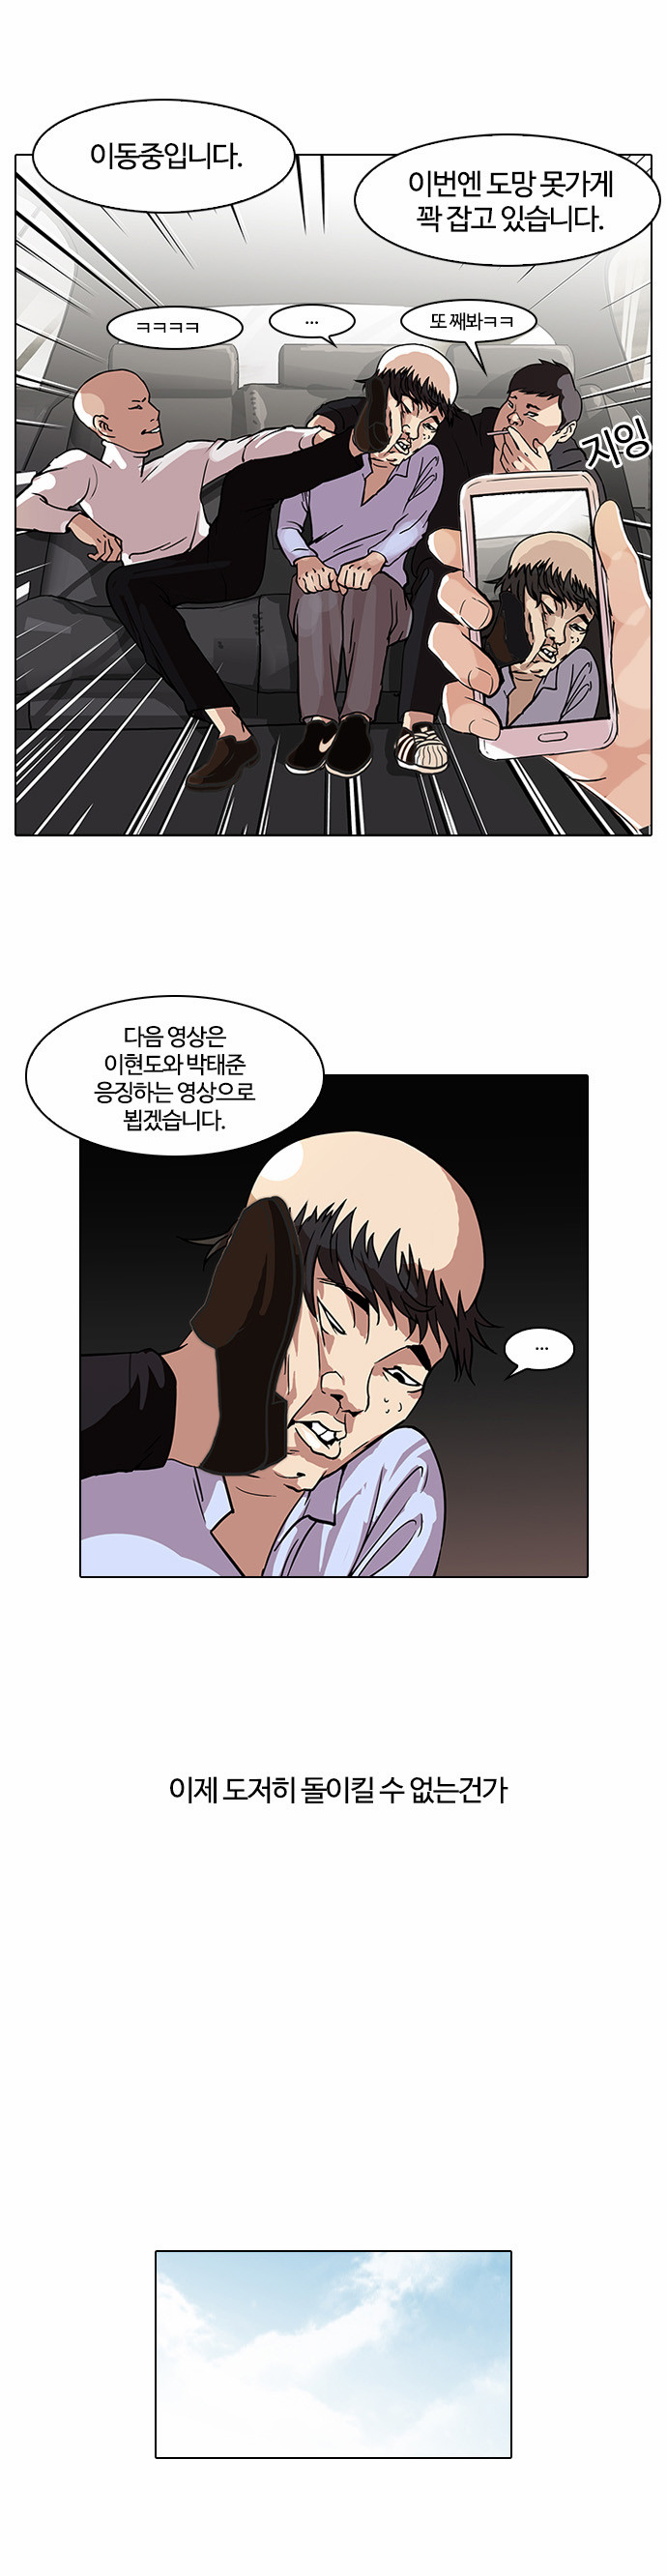 Lookism - Chapter 67 - Page 2